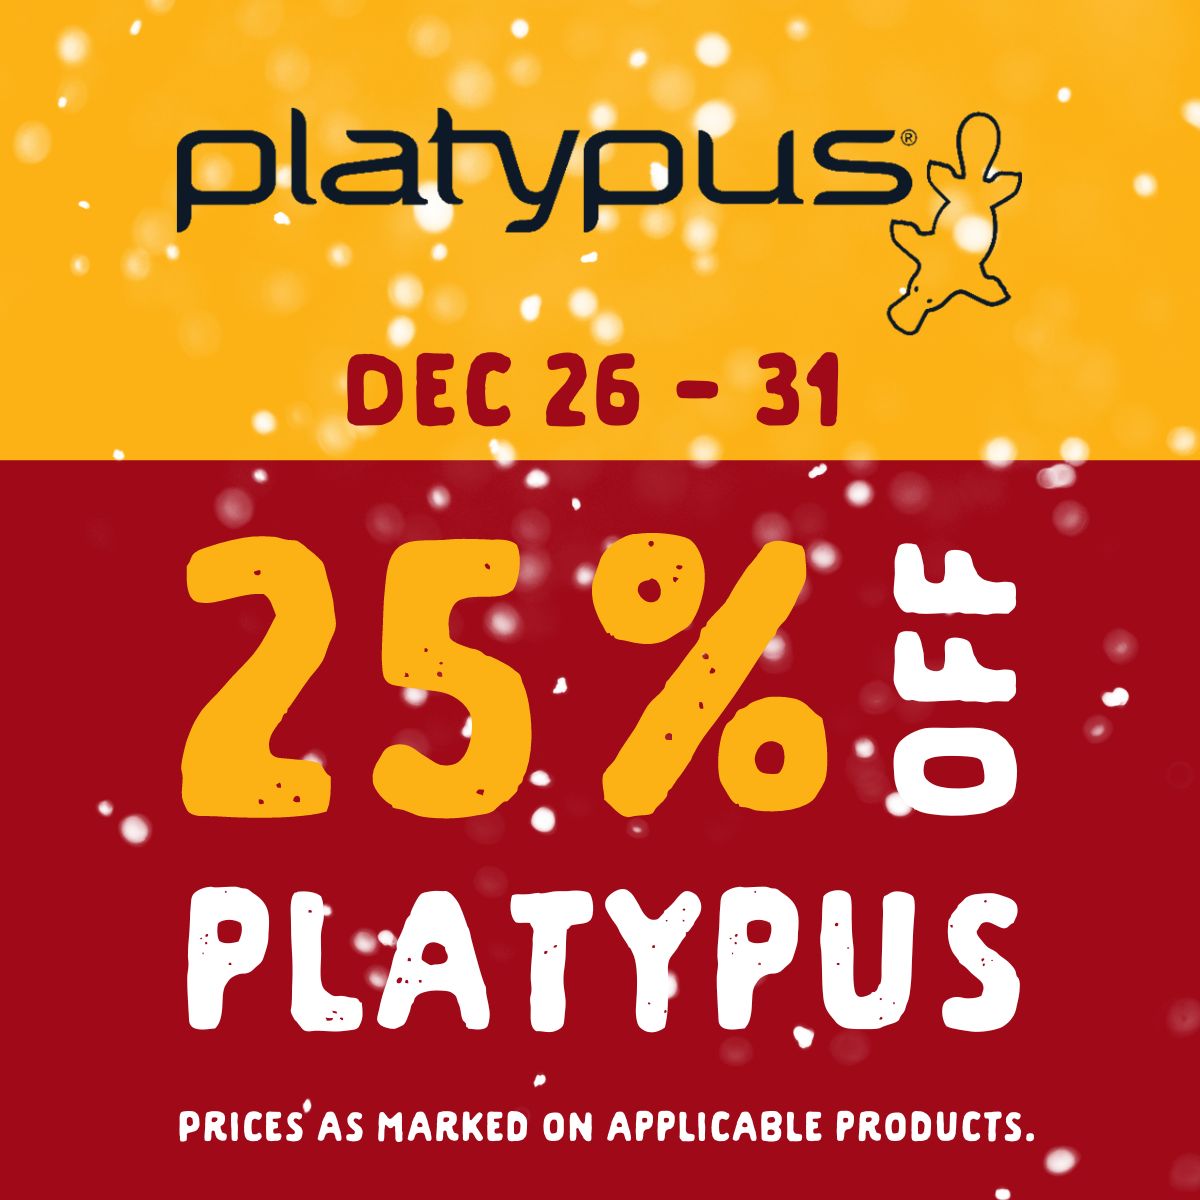 25% off Platypus from December 26 to 31. Prices as marked on applicable products.